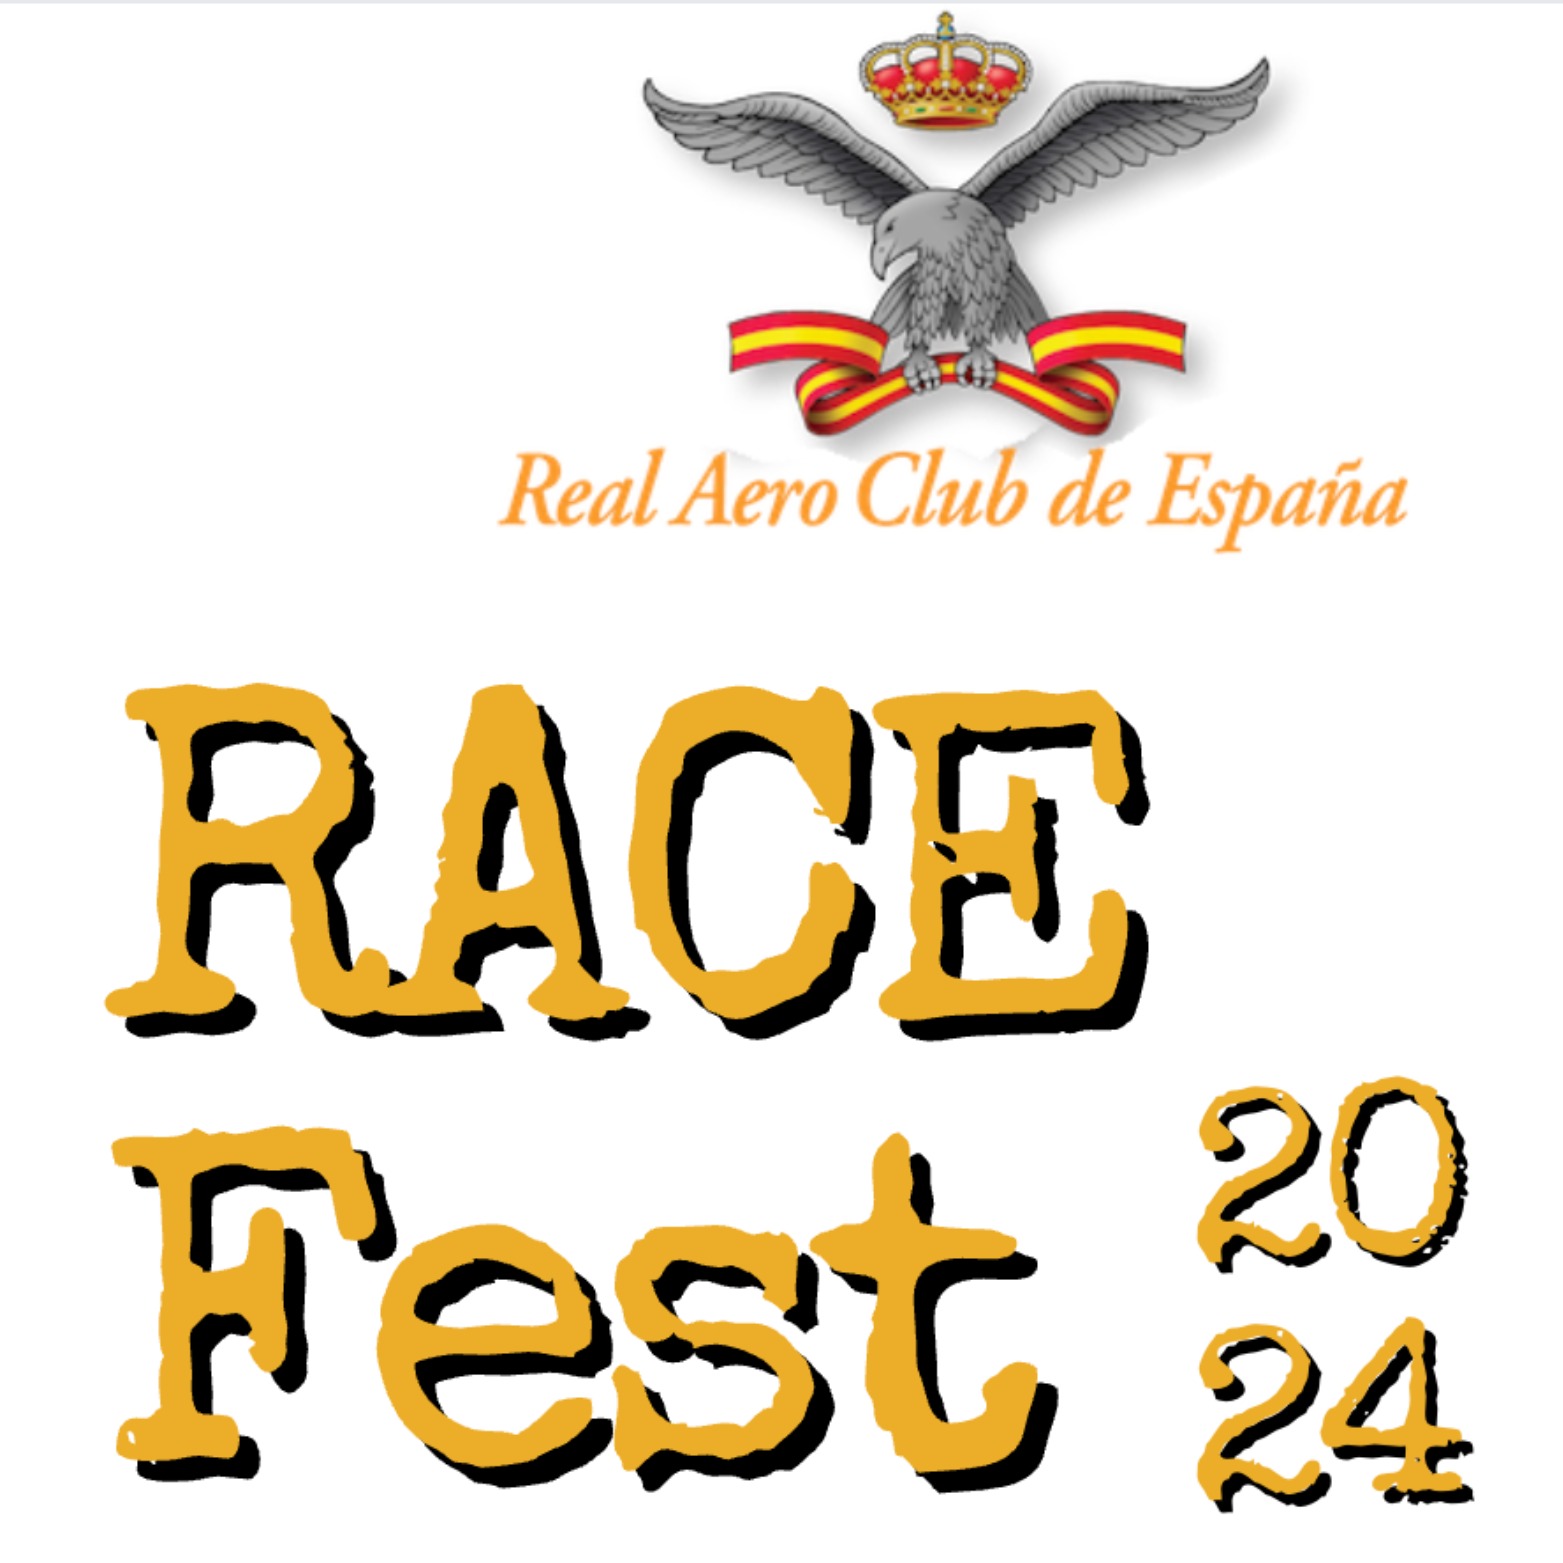 RACE FEST 2024 – “THE AVIATION PARTY” IN SPAIN